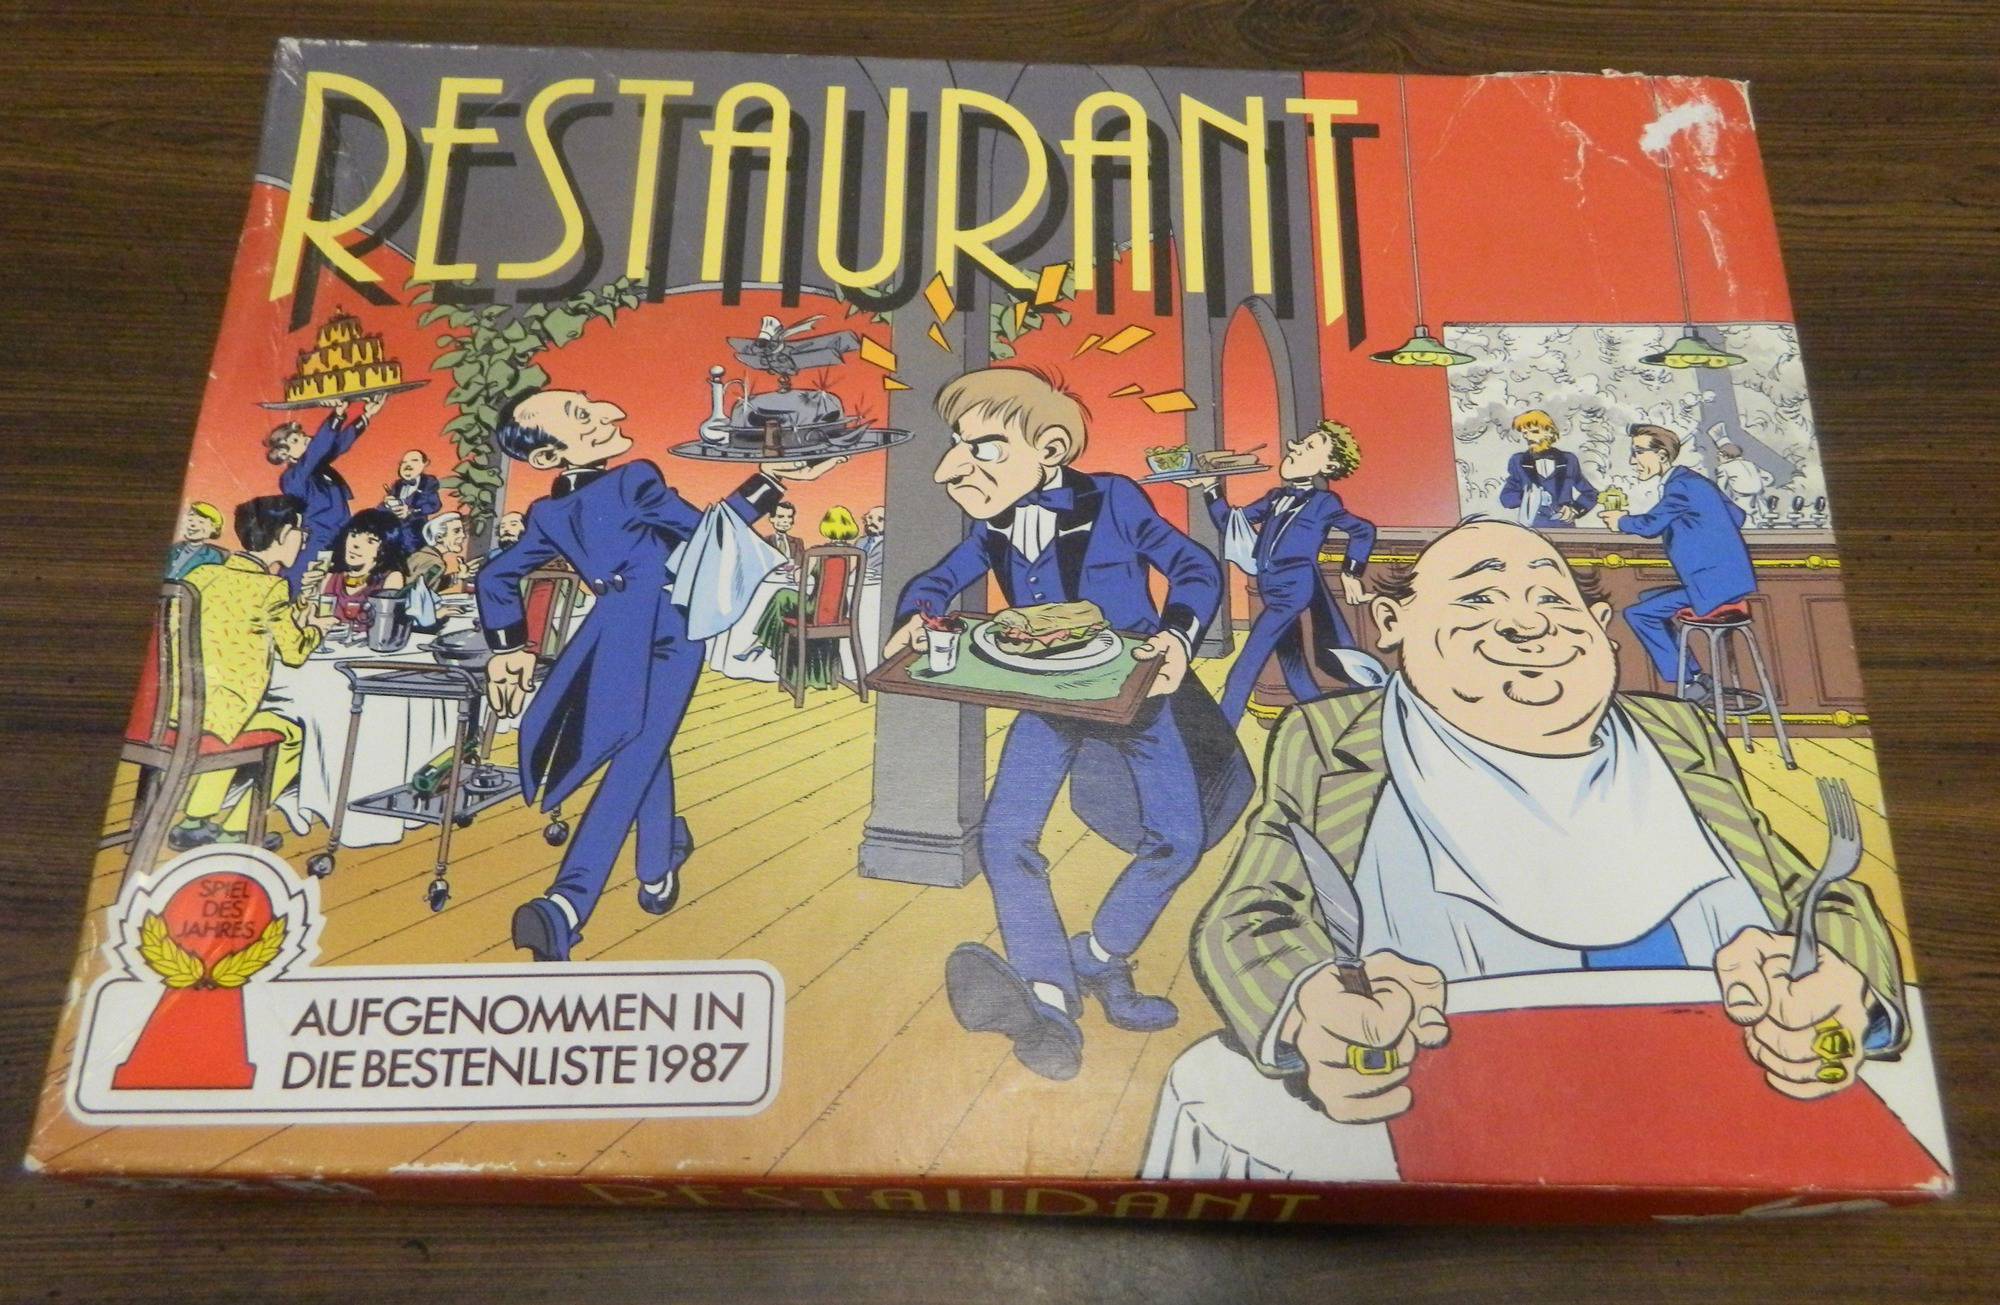 Restaurant Board Game Review and Rules